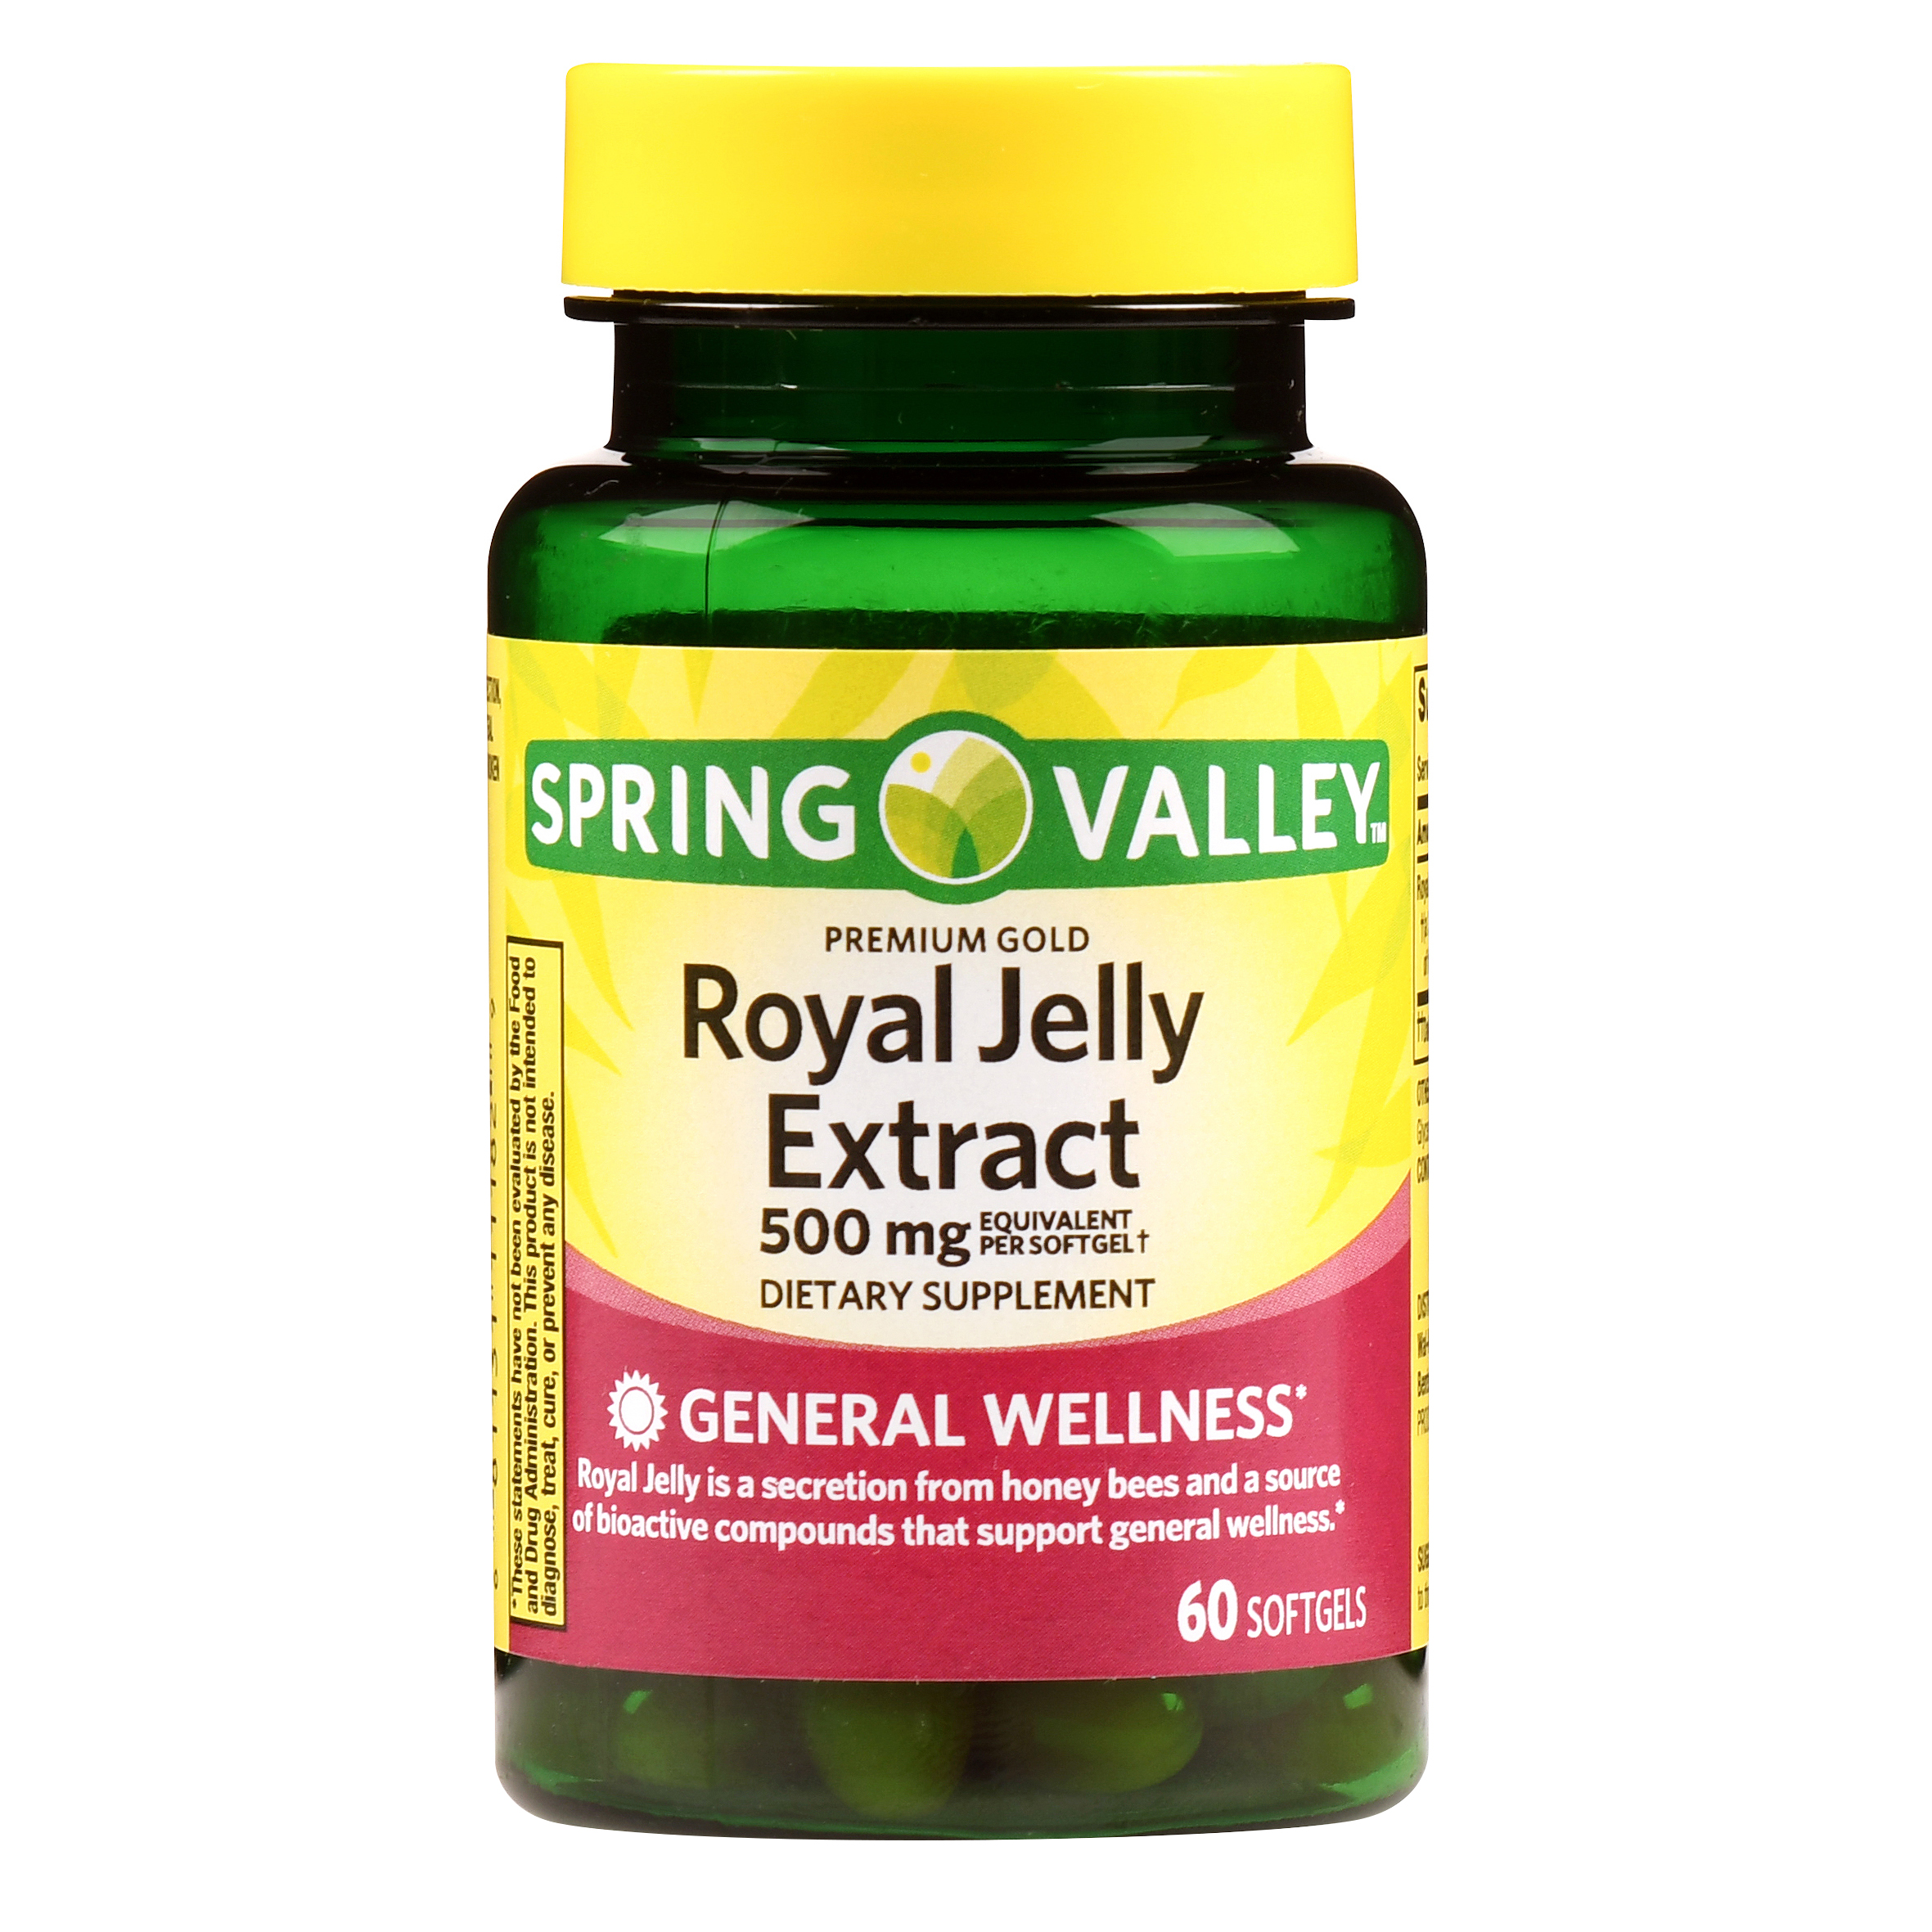 Spring Valley Premium Gold Royal Jelly Softgels, 500 Mg, 60 Ct - image 1 of 3